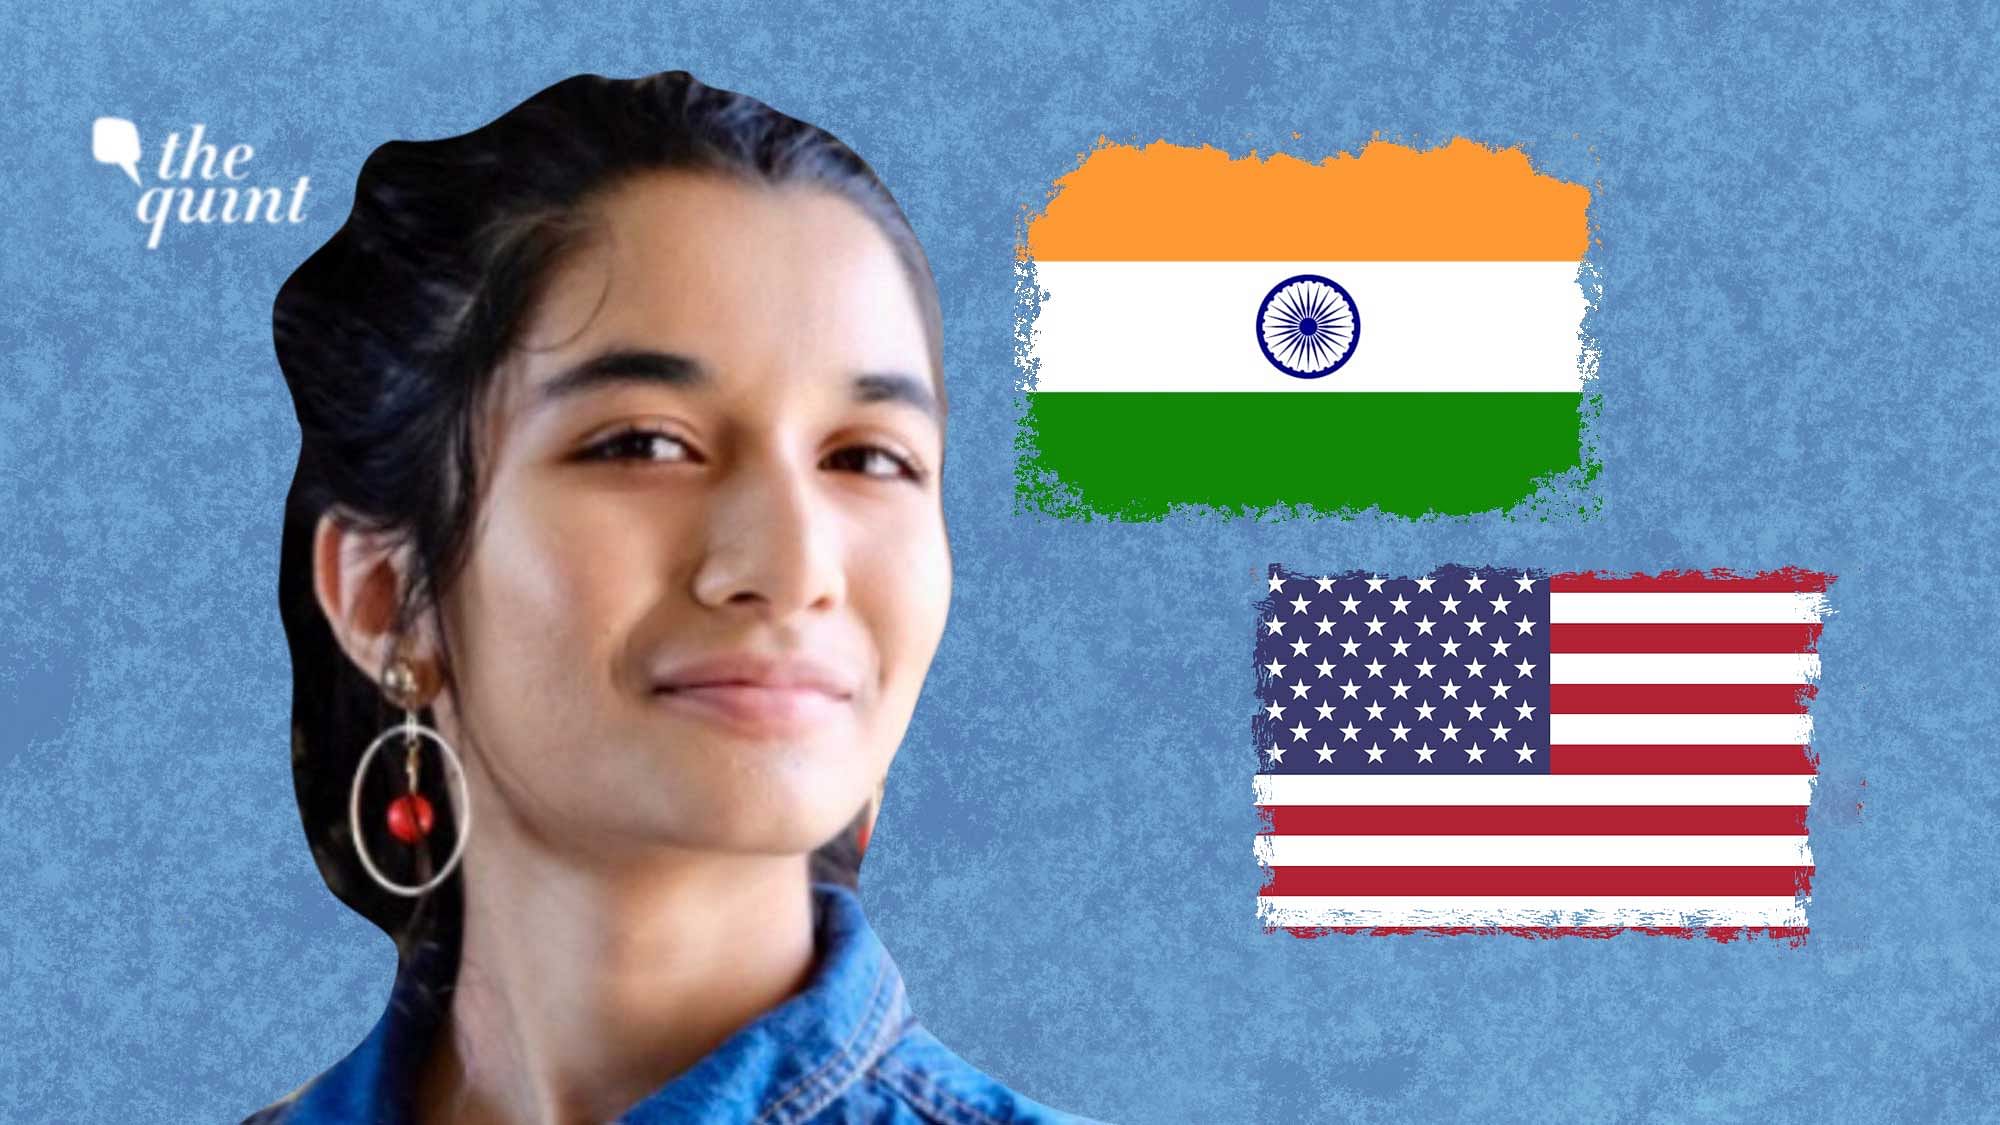 The first Indian American and youngest ever US National Youth Poet Laureate Meera Dasgupta, age 16.